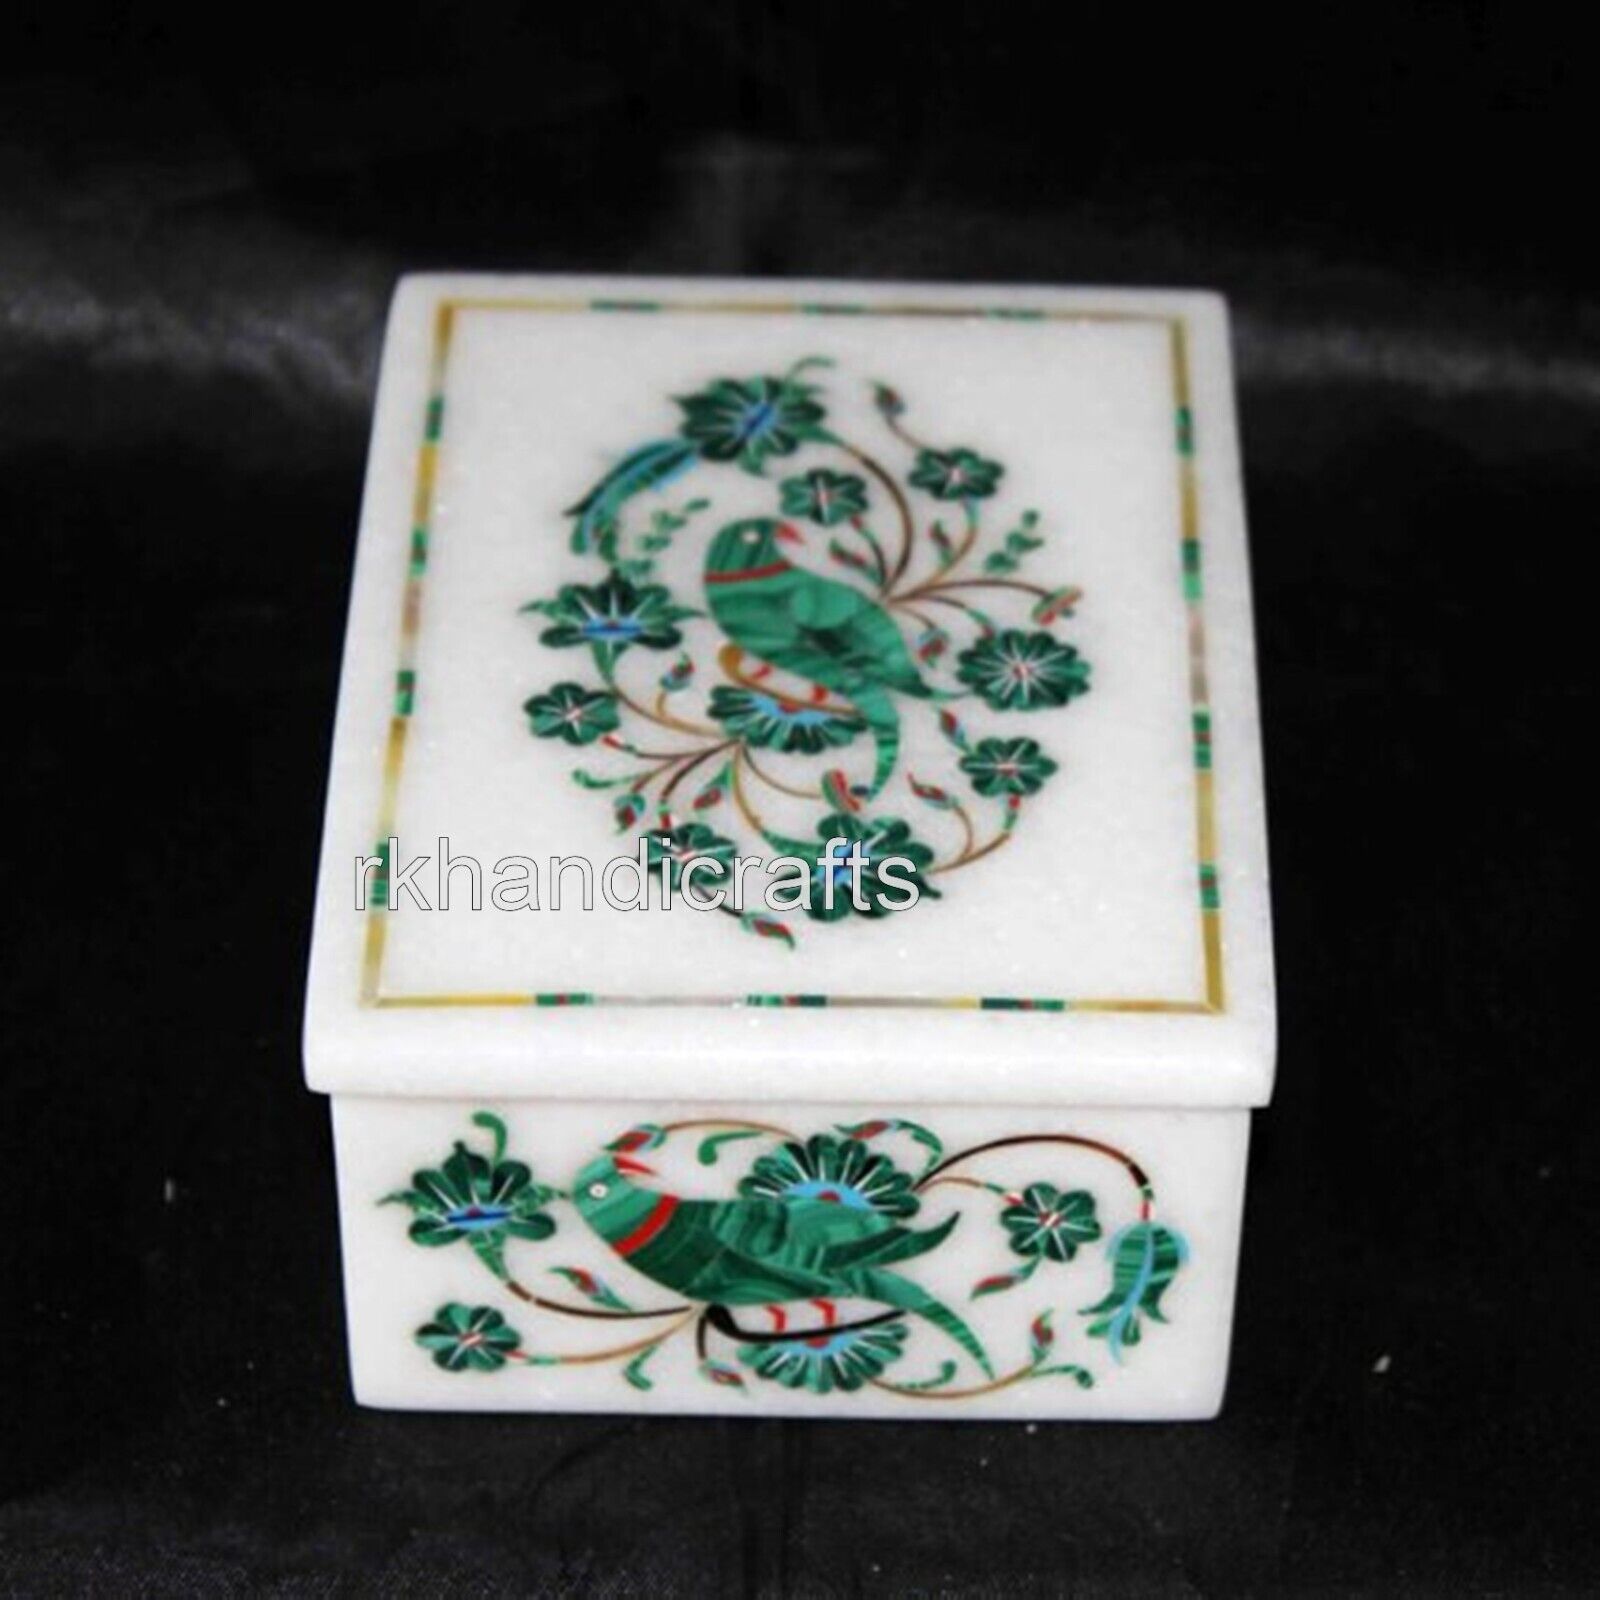 5 x 3.5 Inches White Marble Tie Box Malachite Stone Inlay Work from Vintage Art